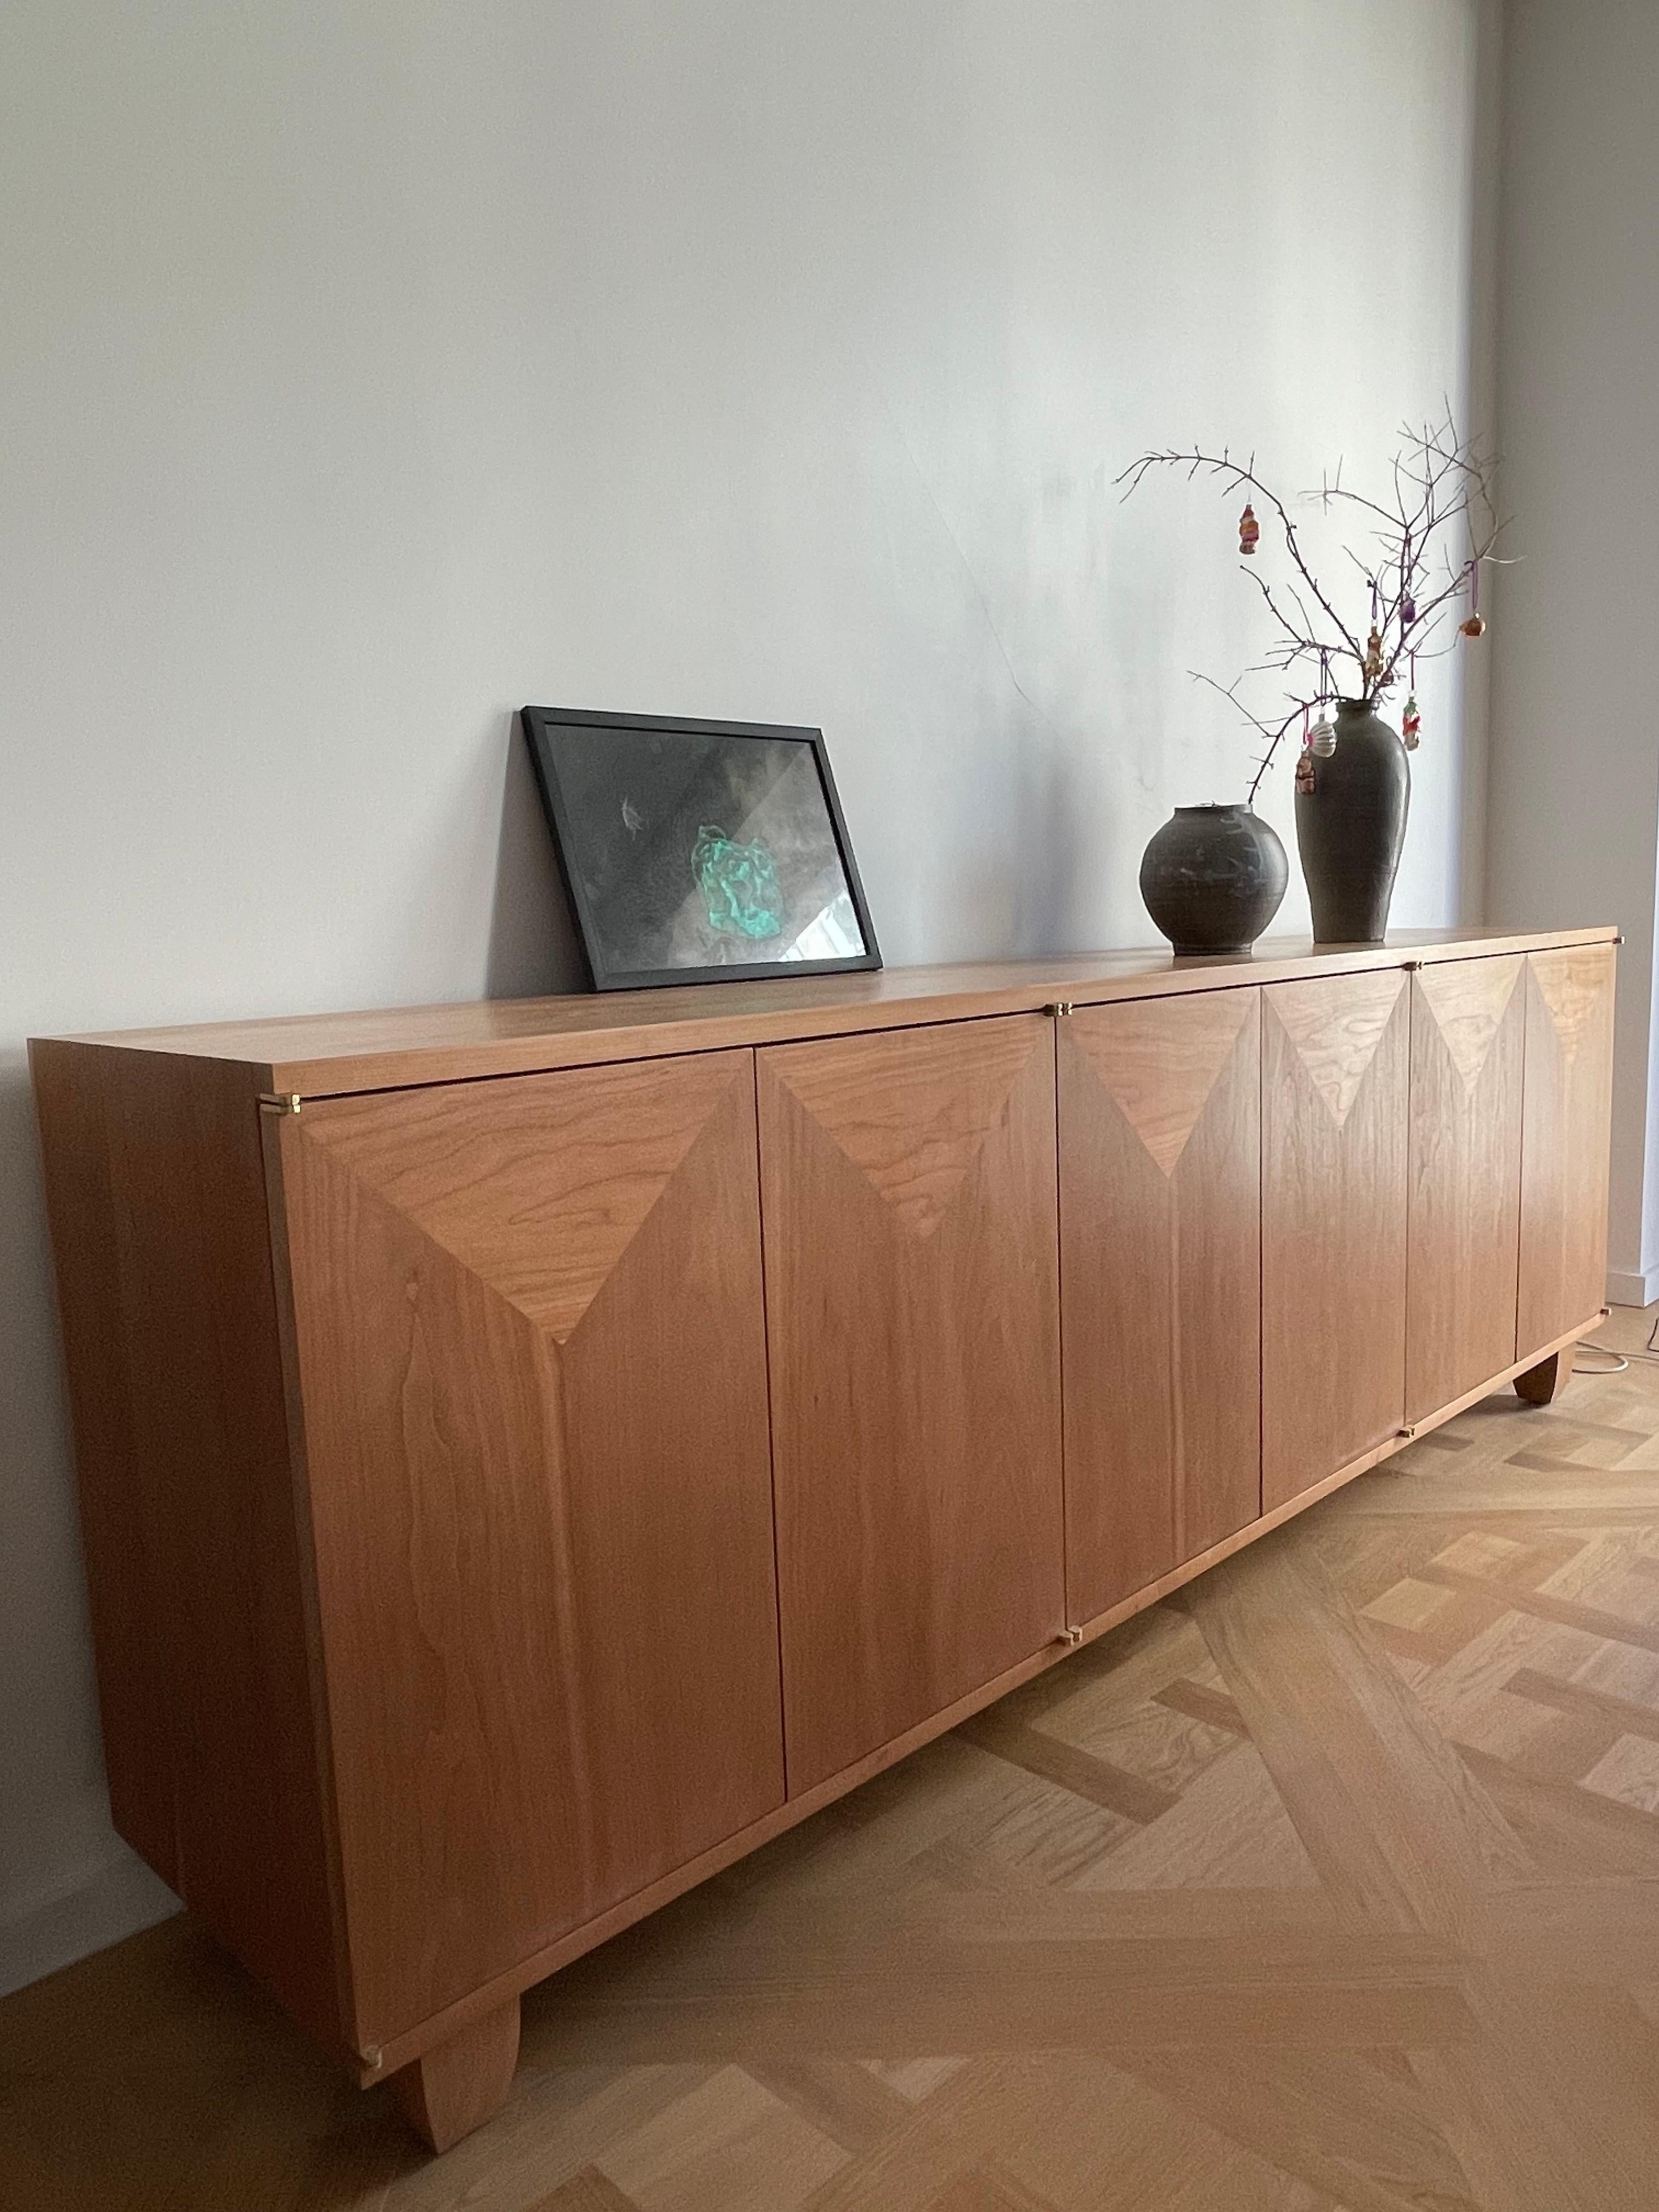 This is a solid North American cherry wood sideboard with custom concealed brass pivot hinges.
The piece was inspired by the designer’s love for the natural beauty and integrity of this indigenous New England wood.
